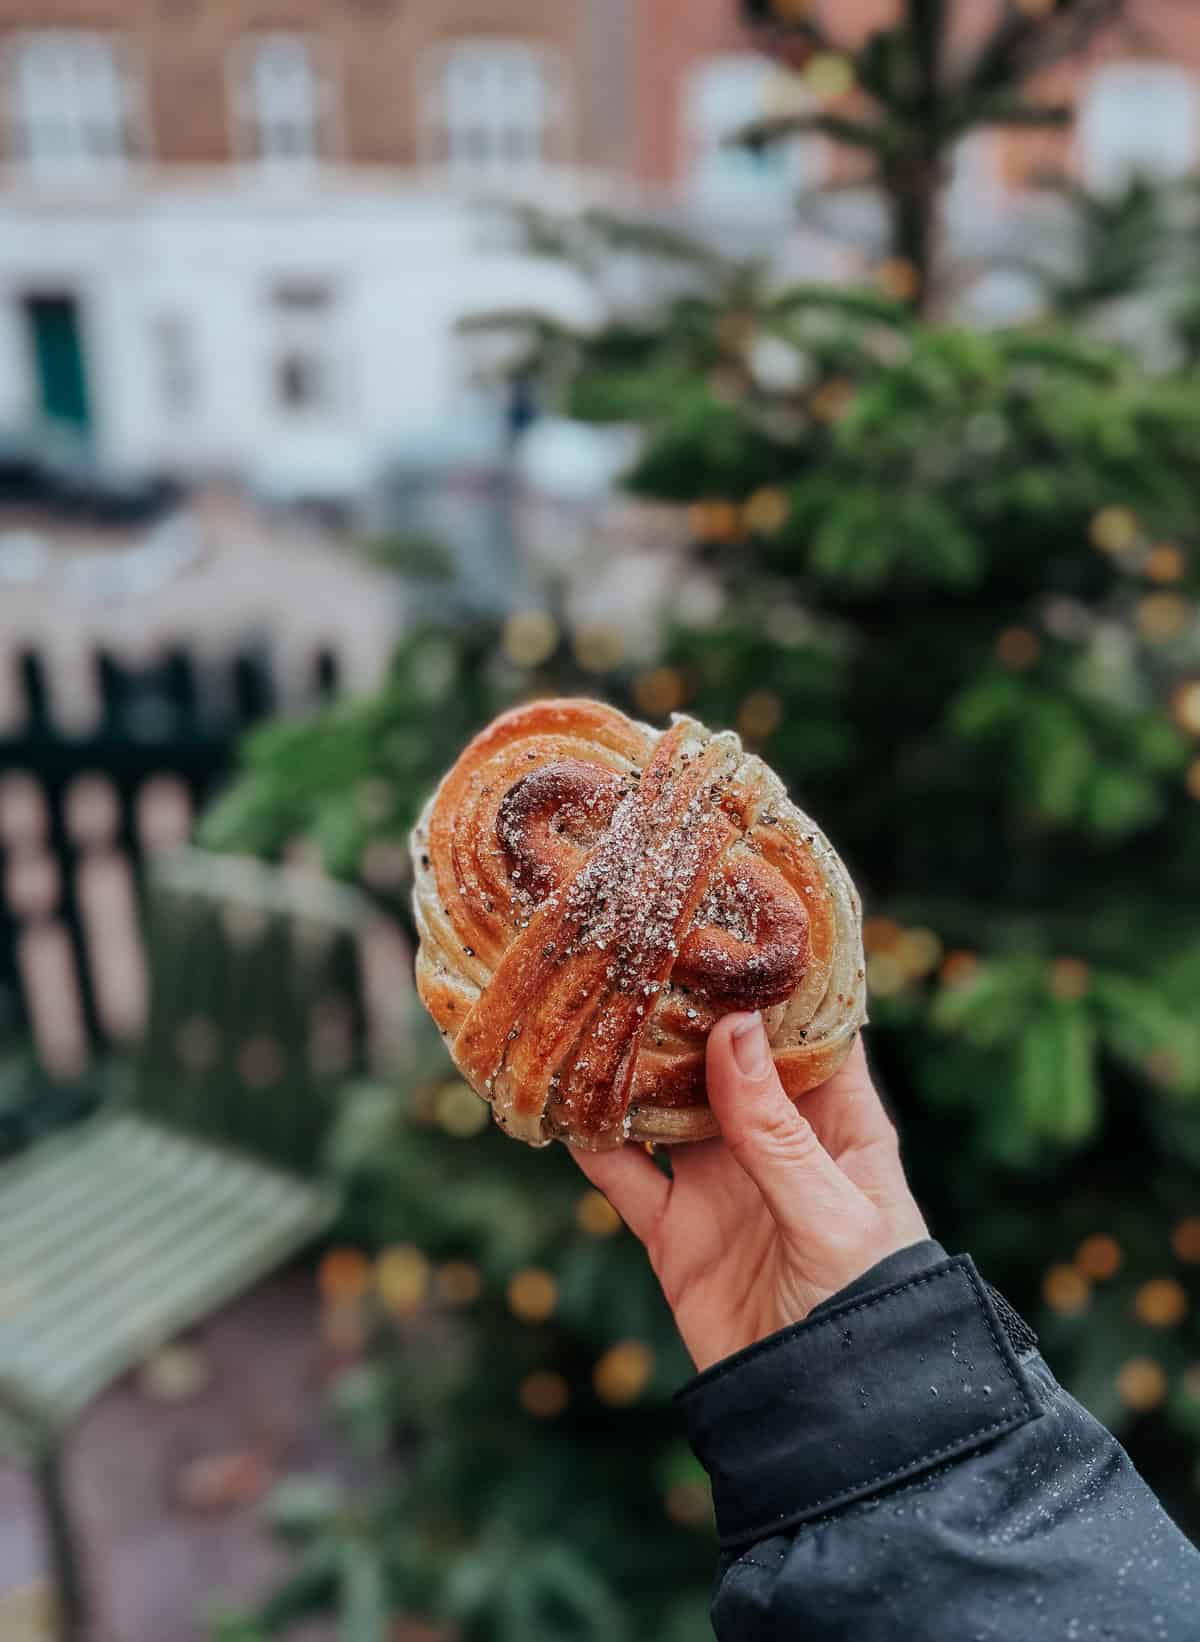 Close-up of a hand holding a traditional Scandinavian cinnamon pastry, dusted with sugar, against a blurred background of a Christmas tree.